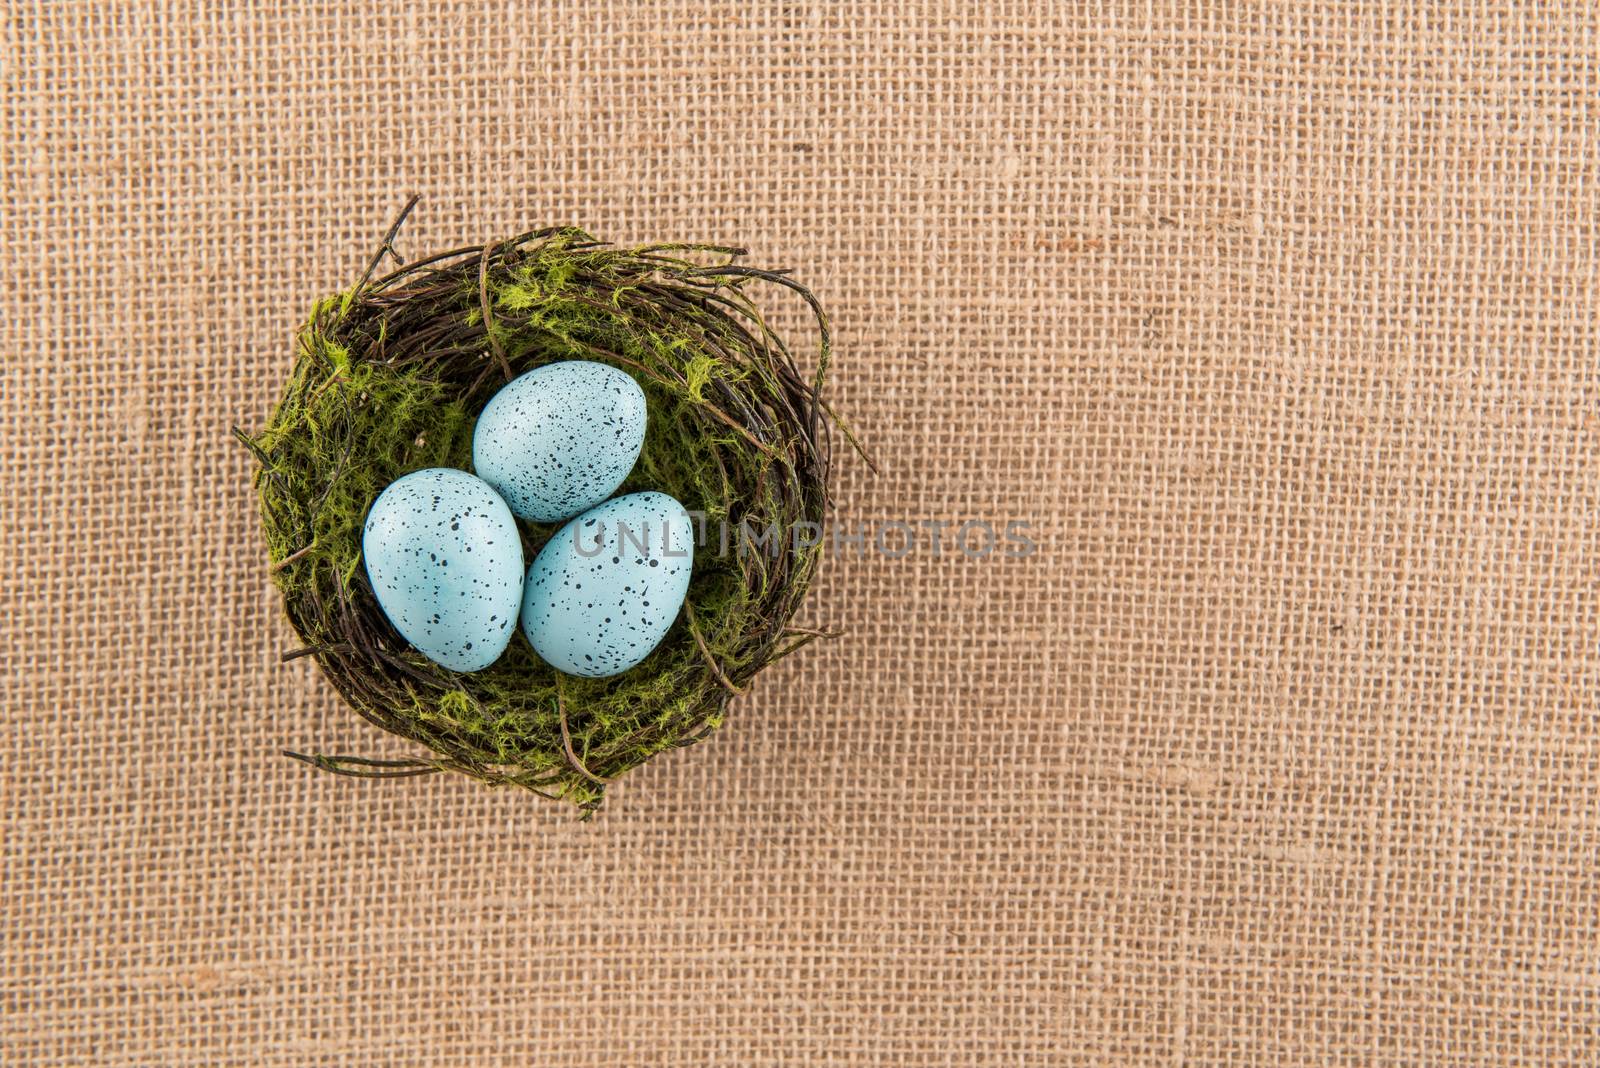 Three blue speckled eggs in nest on burlap background